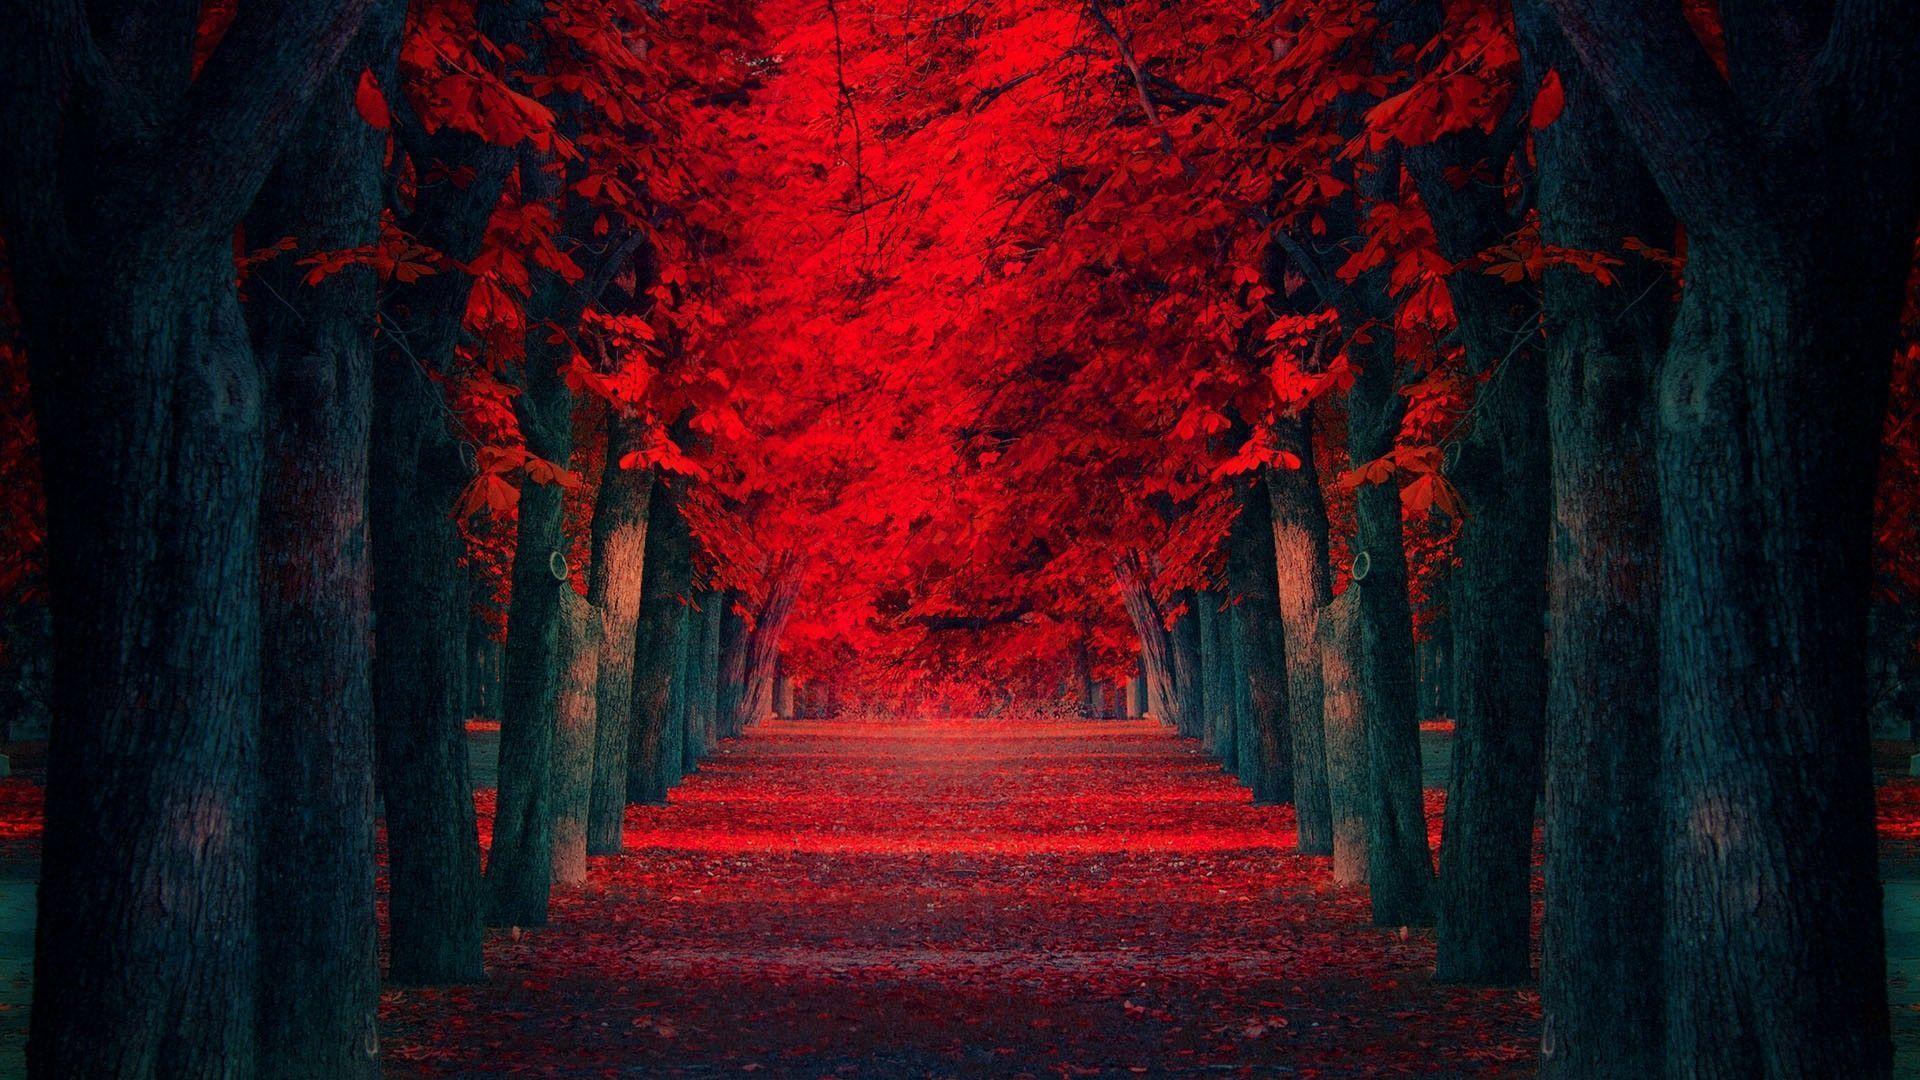 Black Trees & Red Leaves Alley